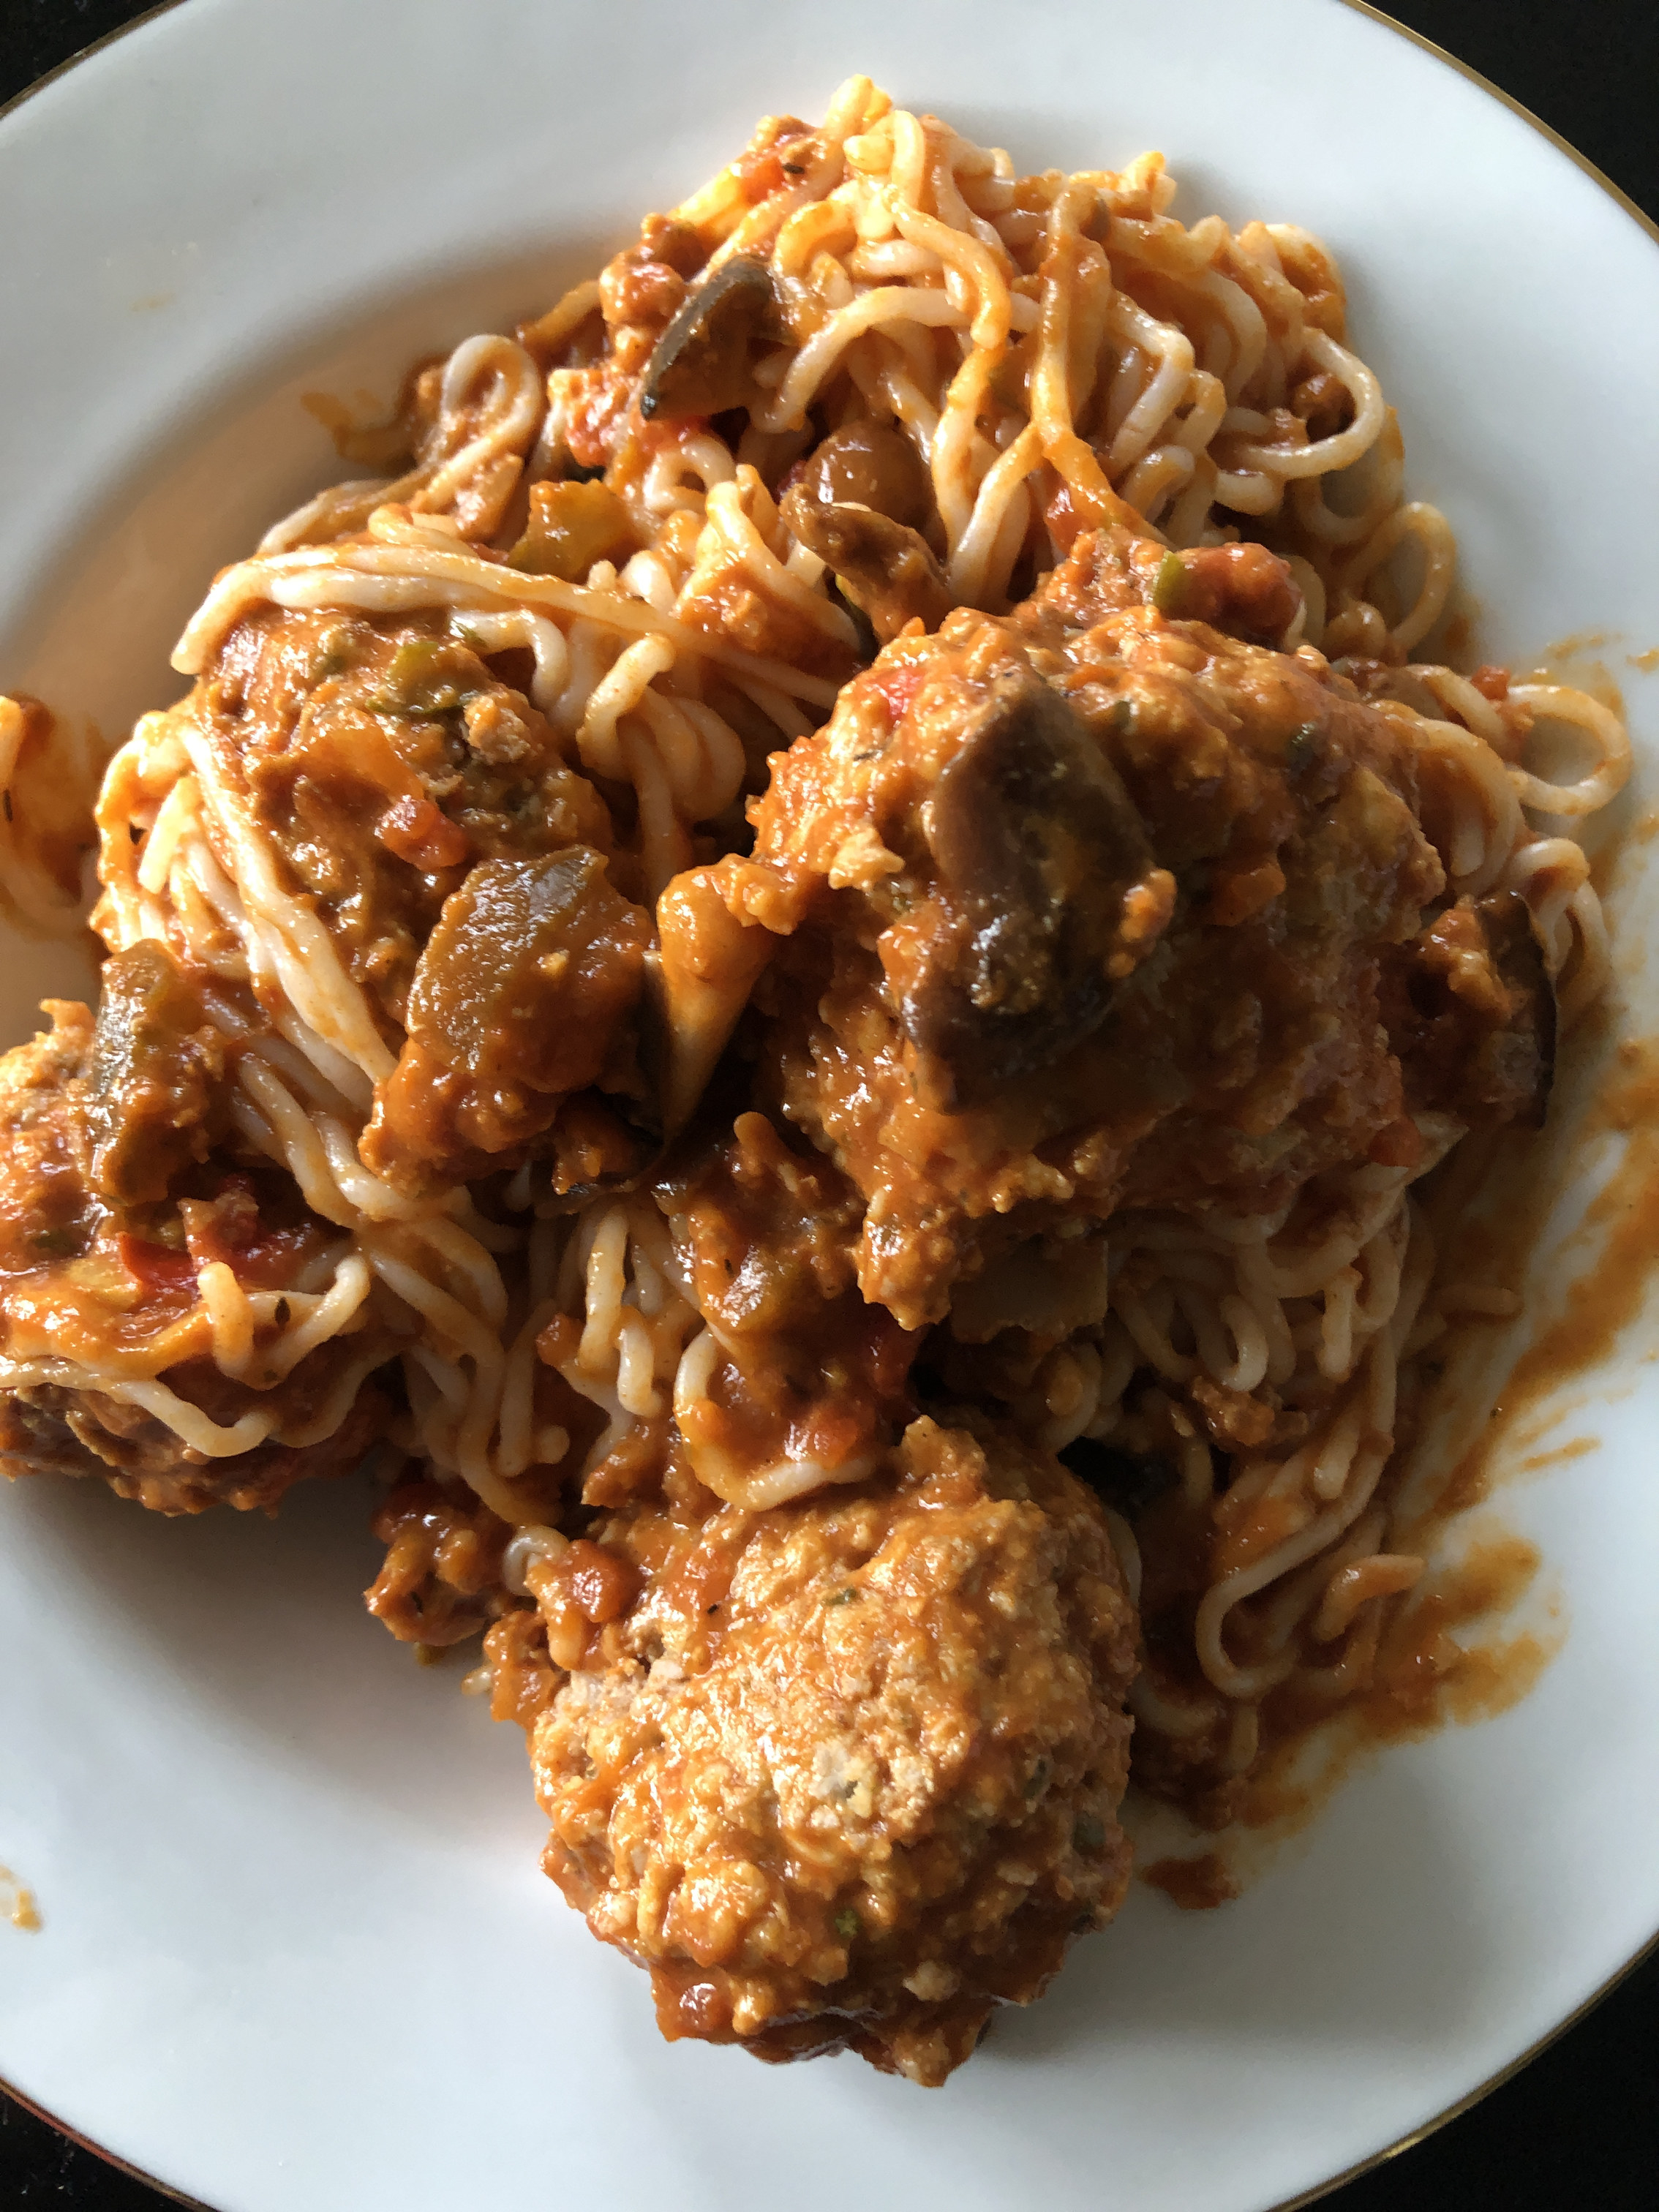 plate of turkey meatballs in tomato sauce, served over spaghetti and sauce